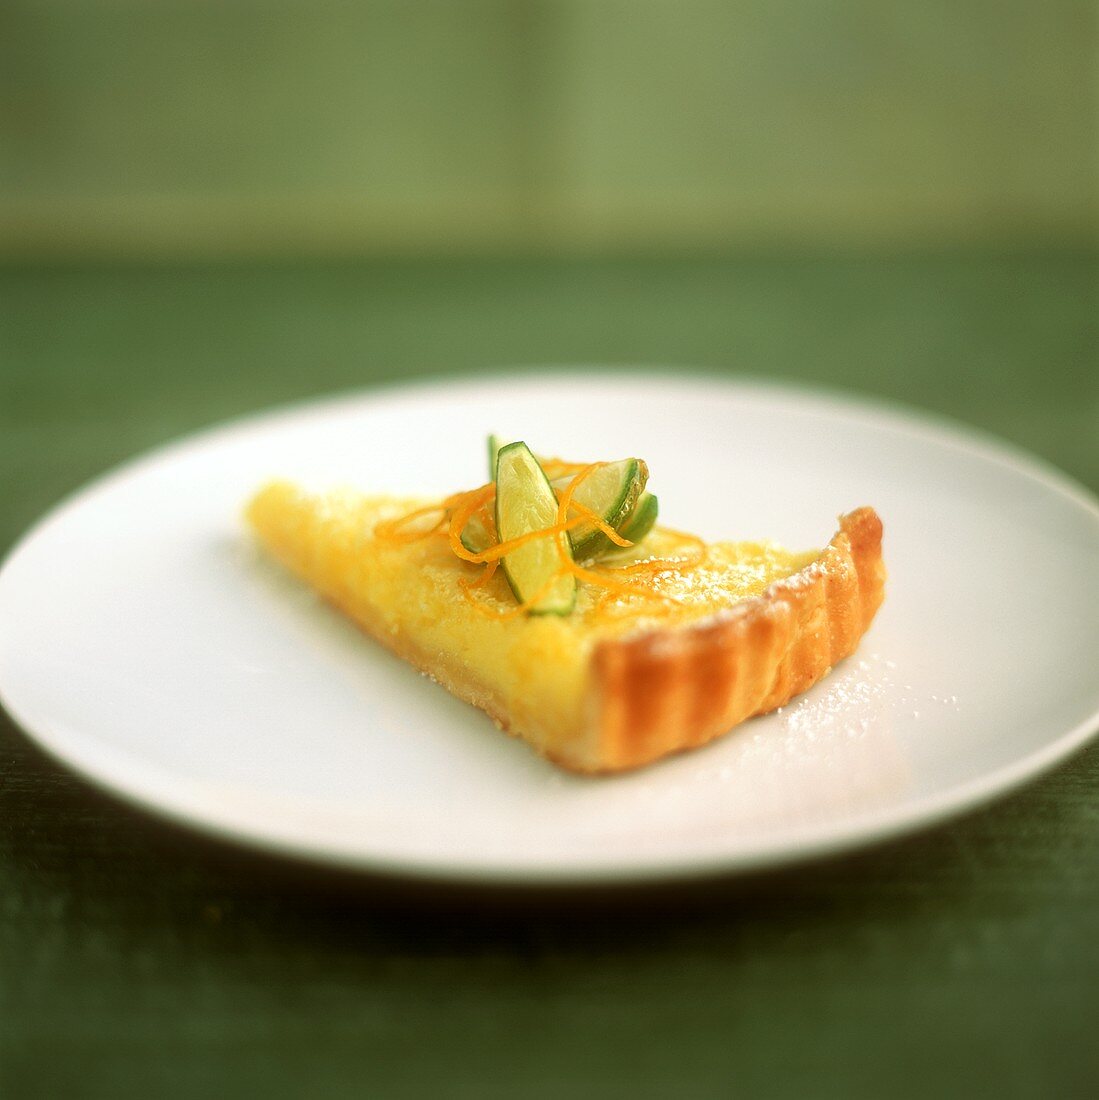 Piece of lime tart on plate